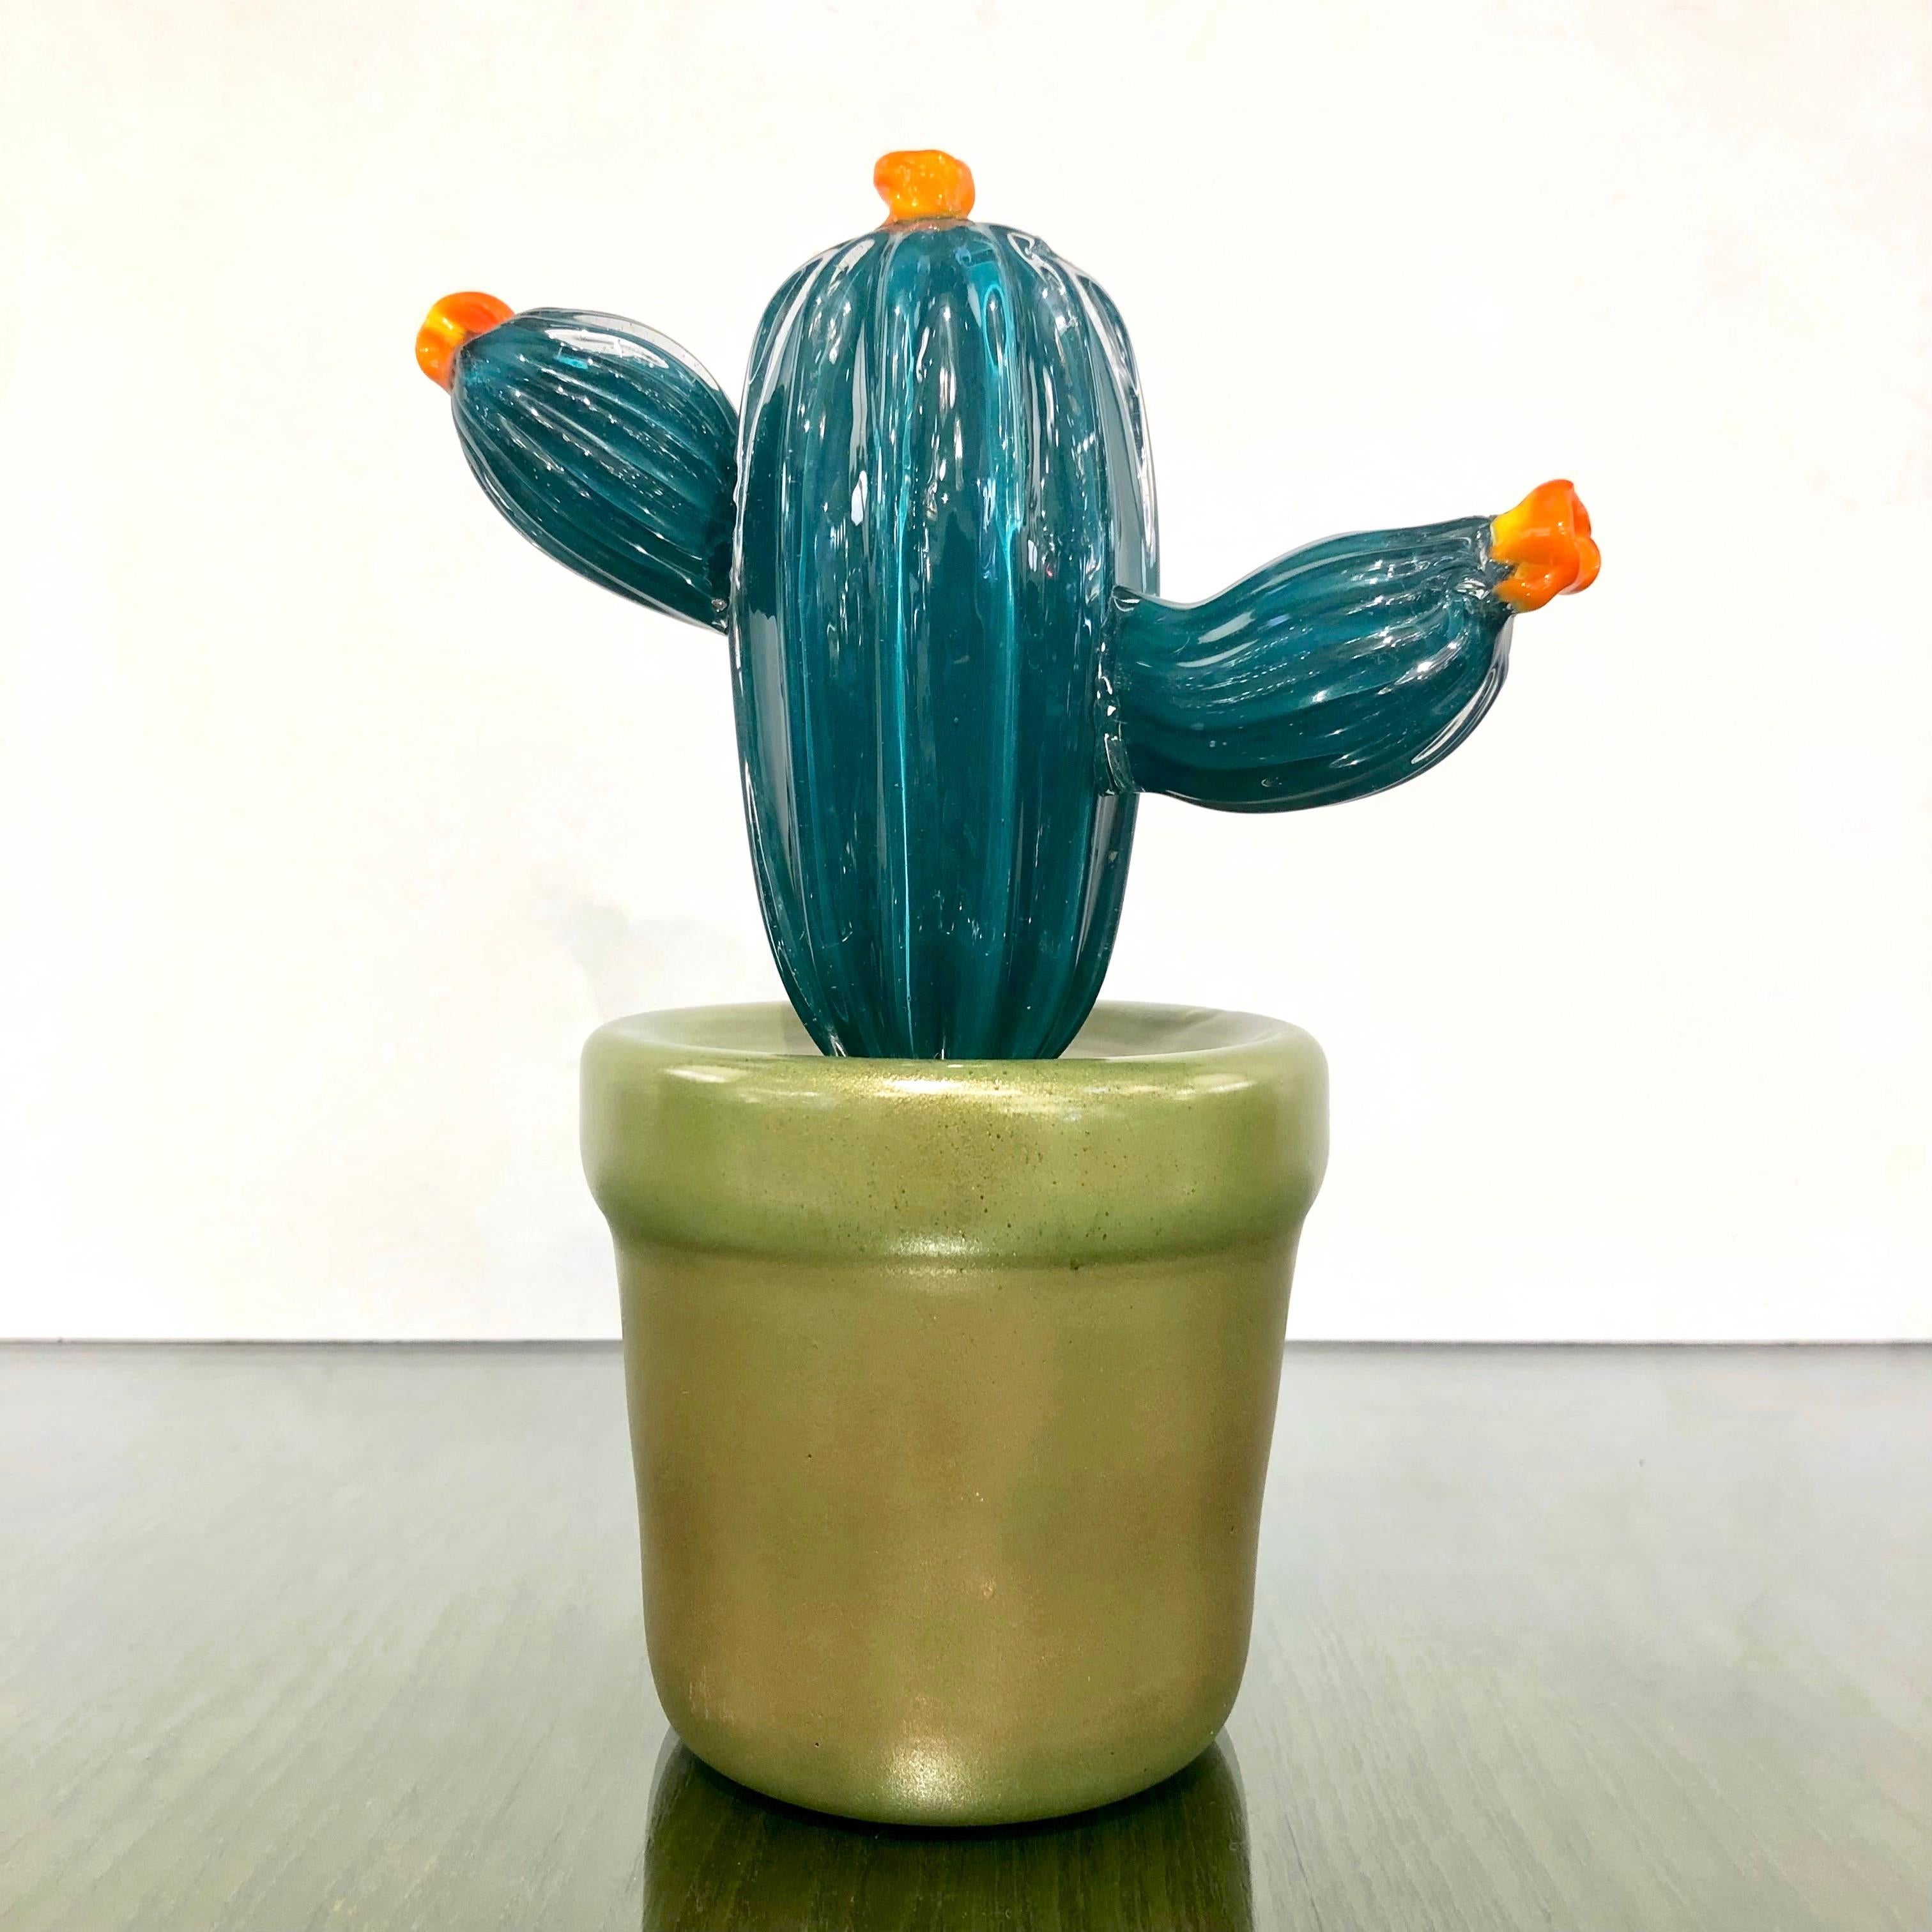 Hand-Crafted 2000s Italian Teal Green Gold Murano Art Glass Cactus Plant with Orange Flowers For Sale